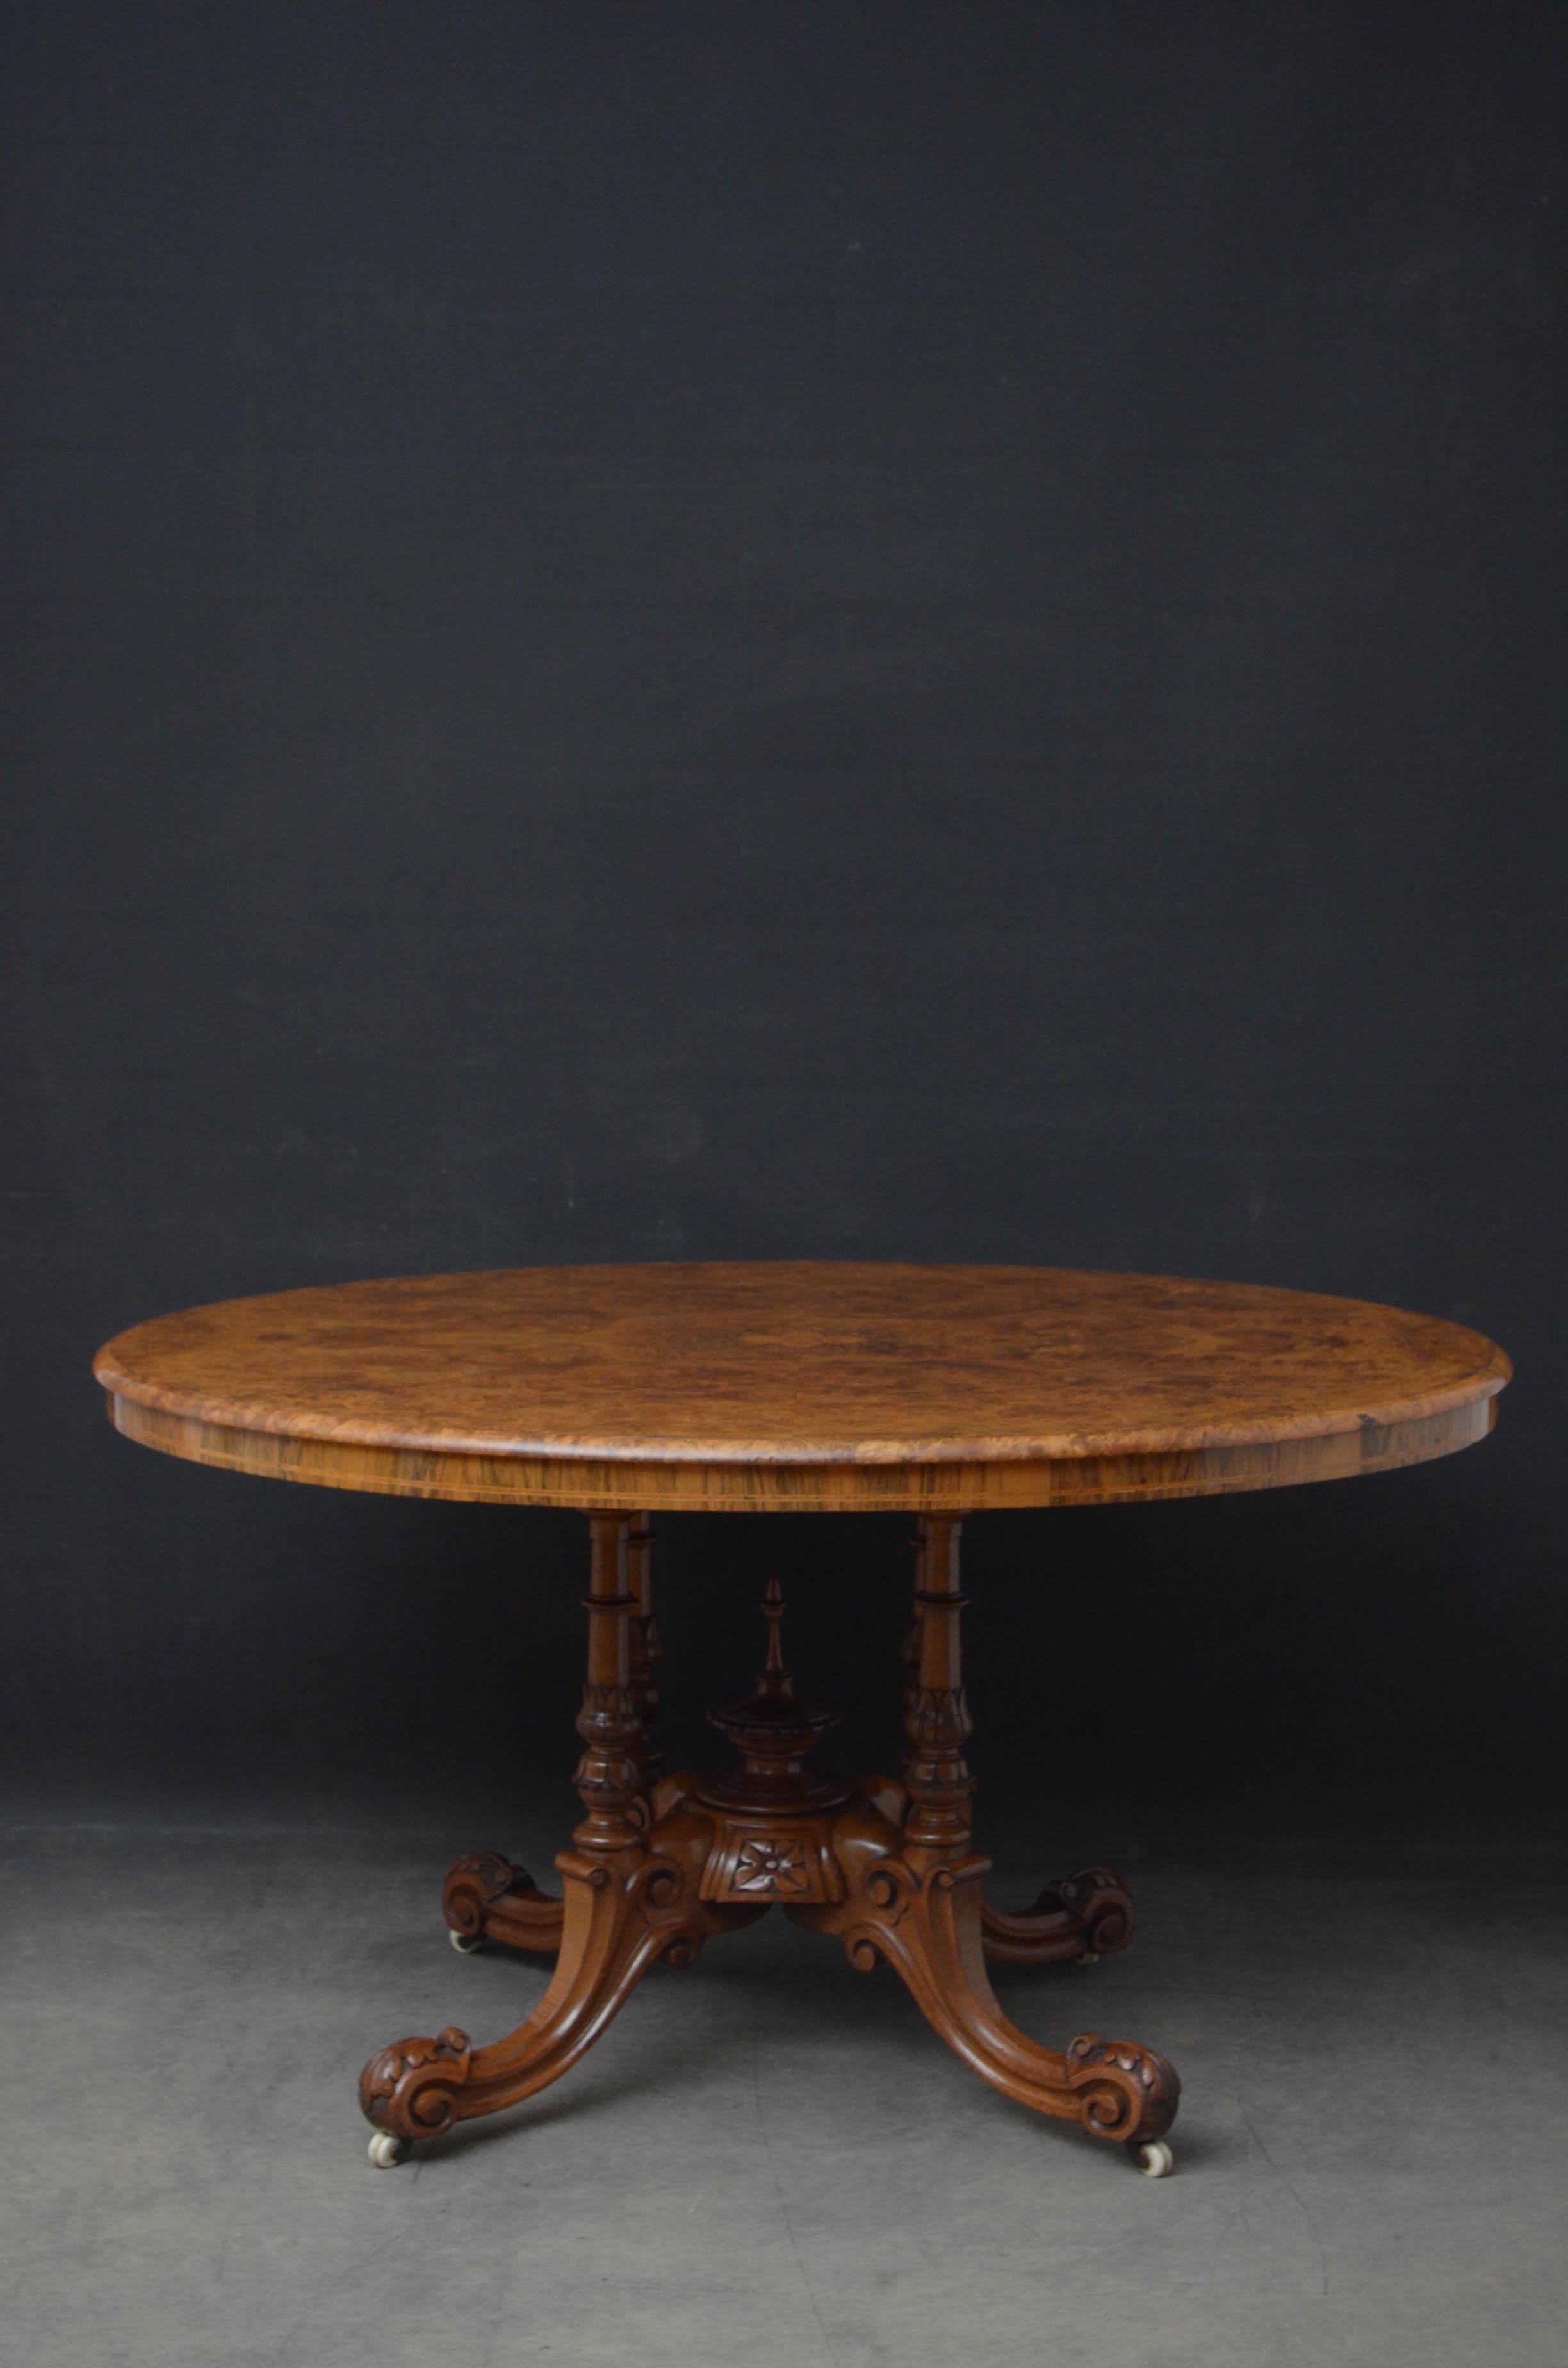 Sn5083 fine Victorian burr walnut tilt top table, having oval top with fabulous grain and satinwood inlays above inlaid frieze, standing on four turned and tulip carved supports terminating in four finely carved downswept legs and original brass